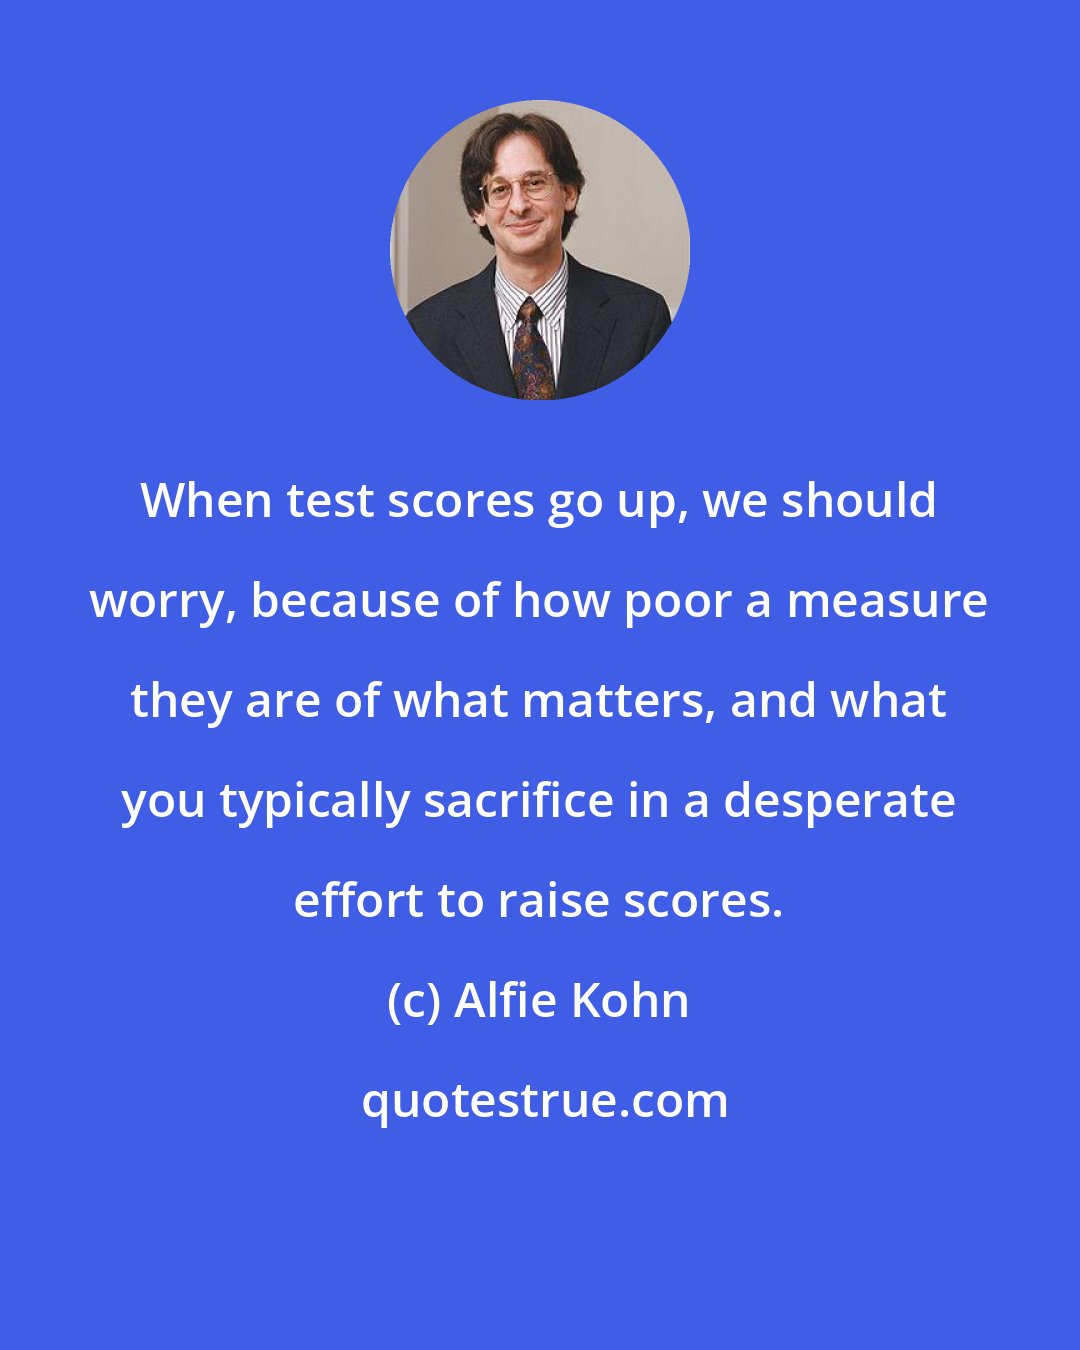 Alfie Kohn: When test scores go up, we should worry, because of how poor a measure they are of what matters, and what you typically sacrifice in a desperate effort to raise scores.